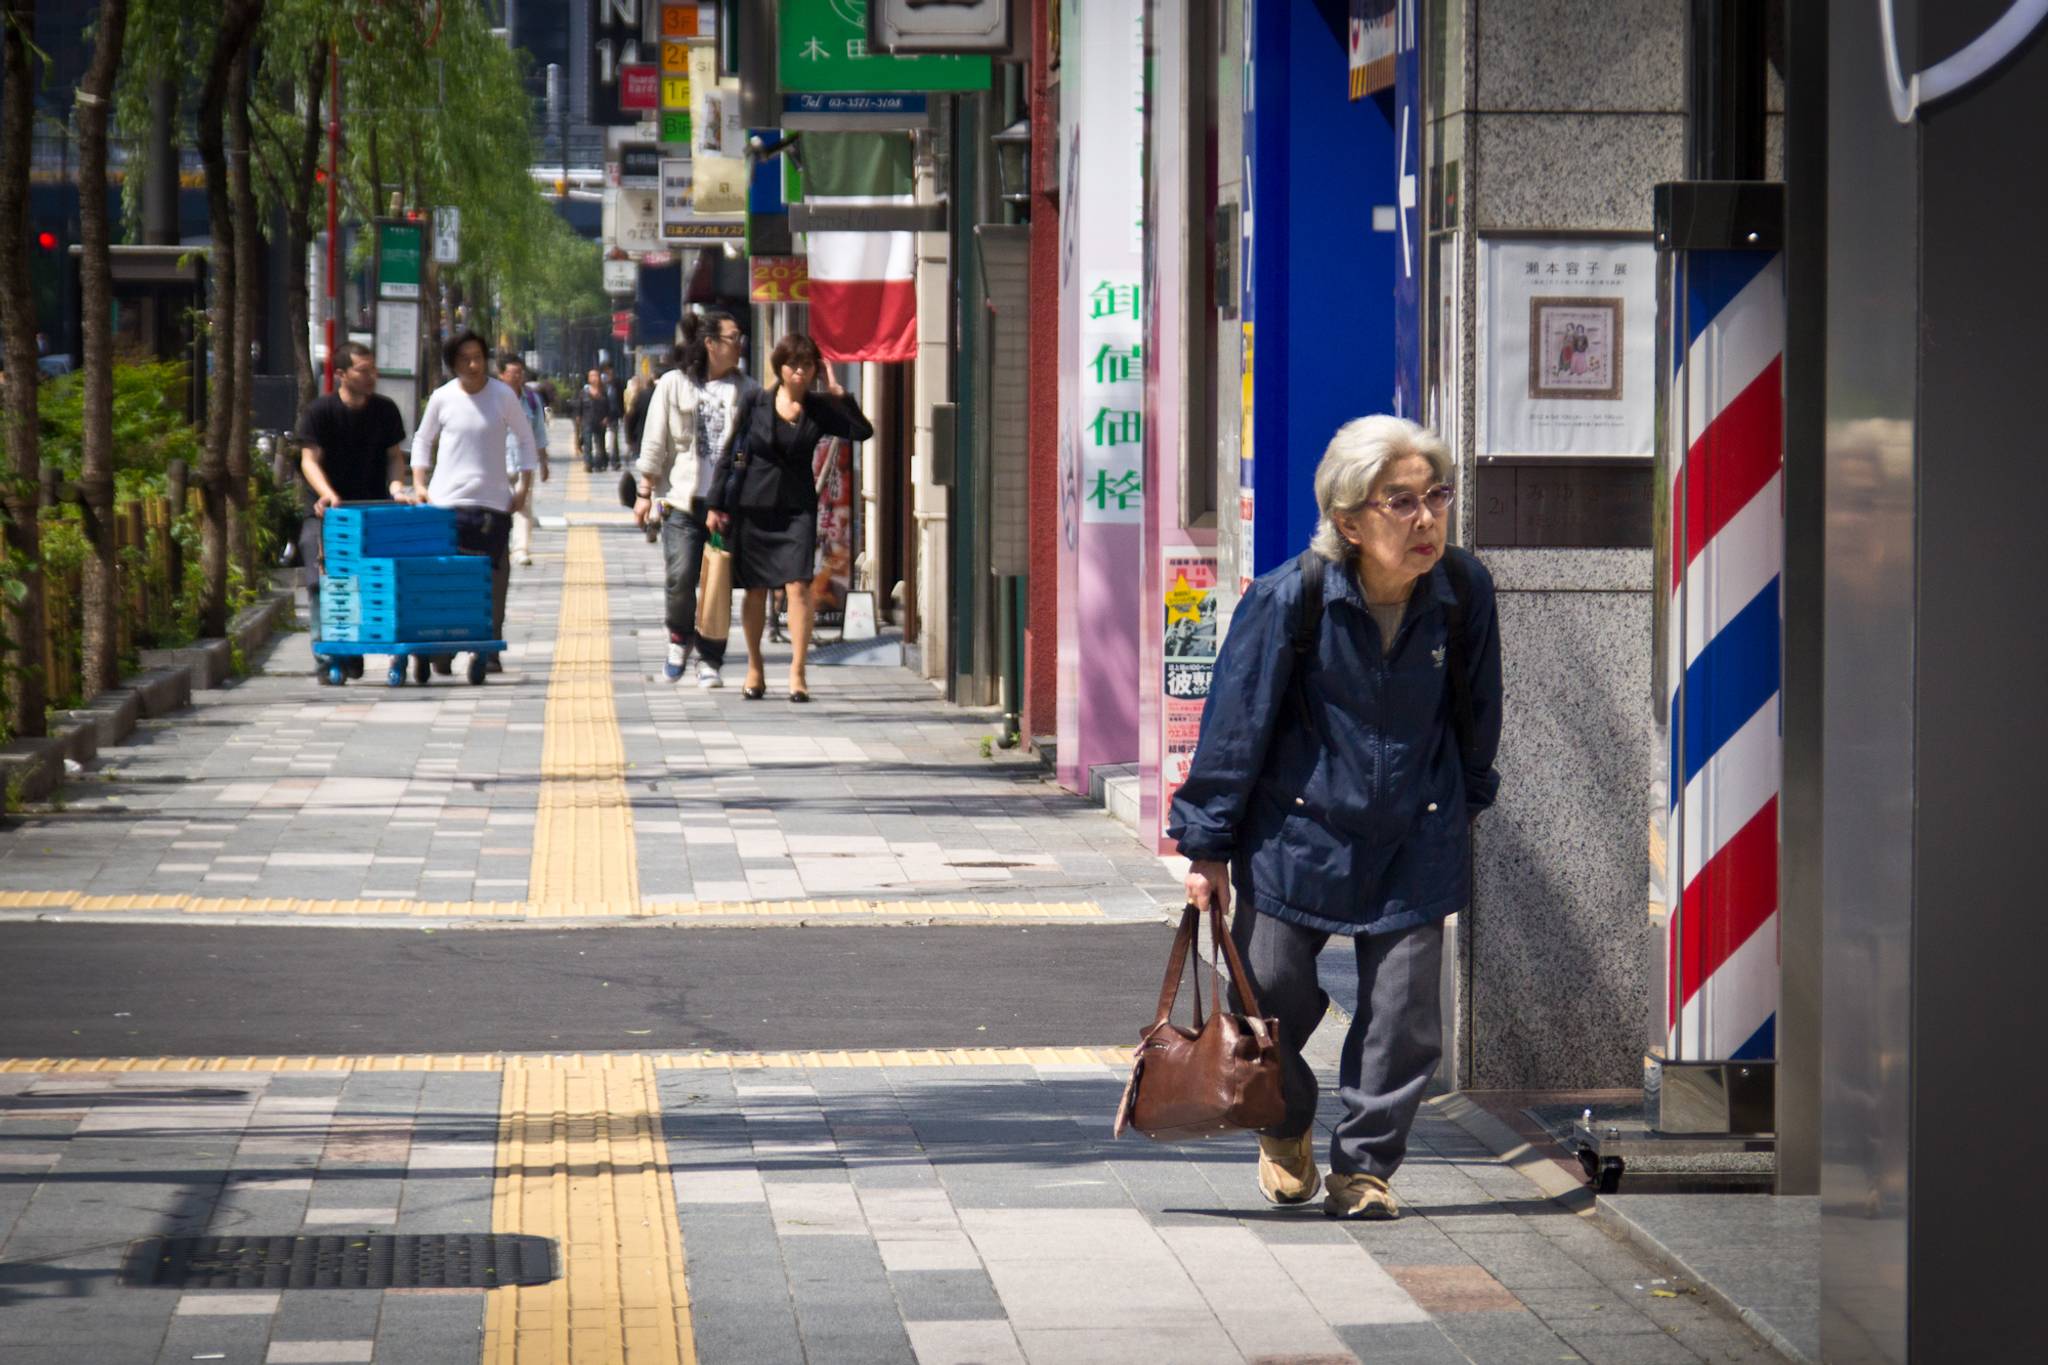 7-Eleven is catering to Japan's seniors